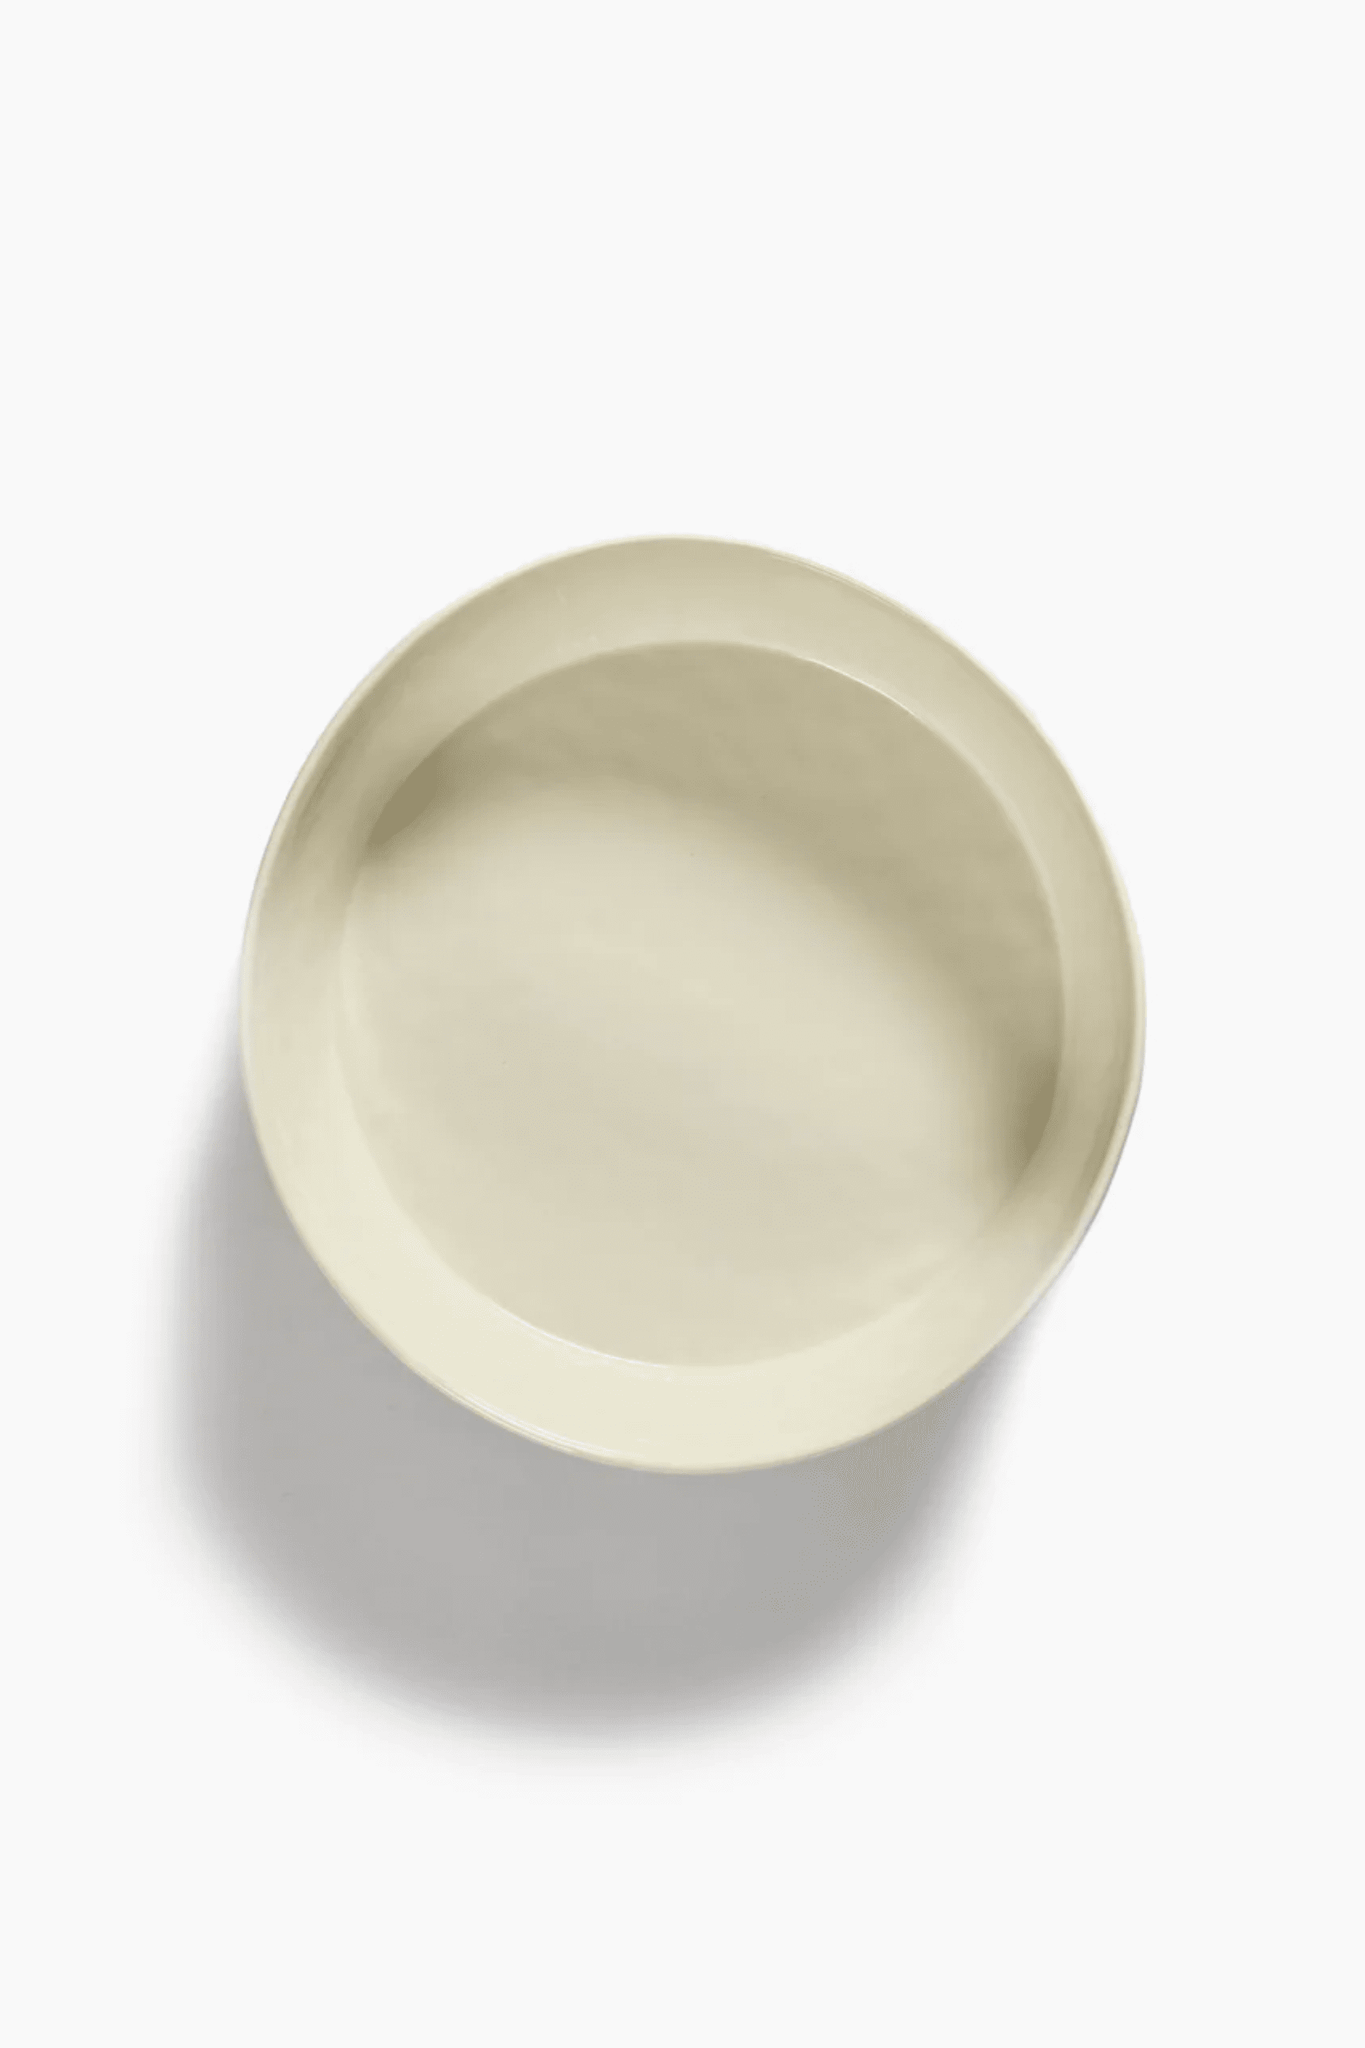 Salad Bowl, White Swirl with Blue Stripes Ottolenghi Serax, top view